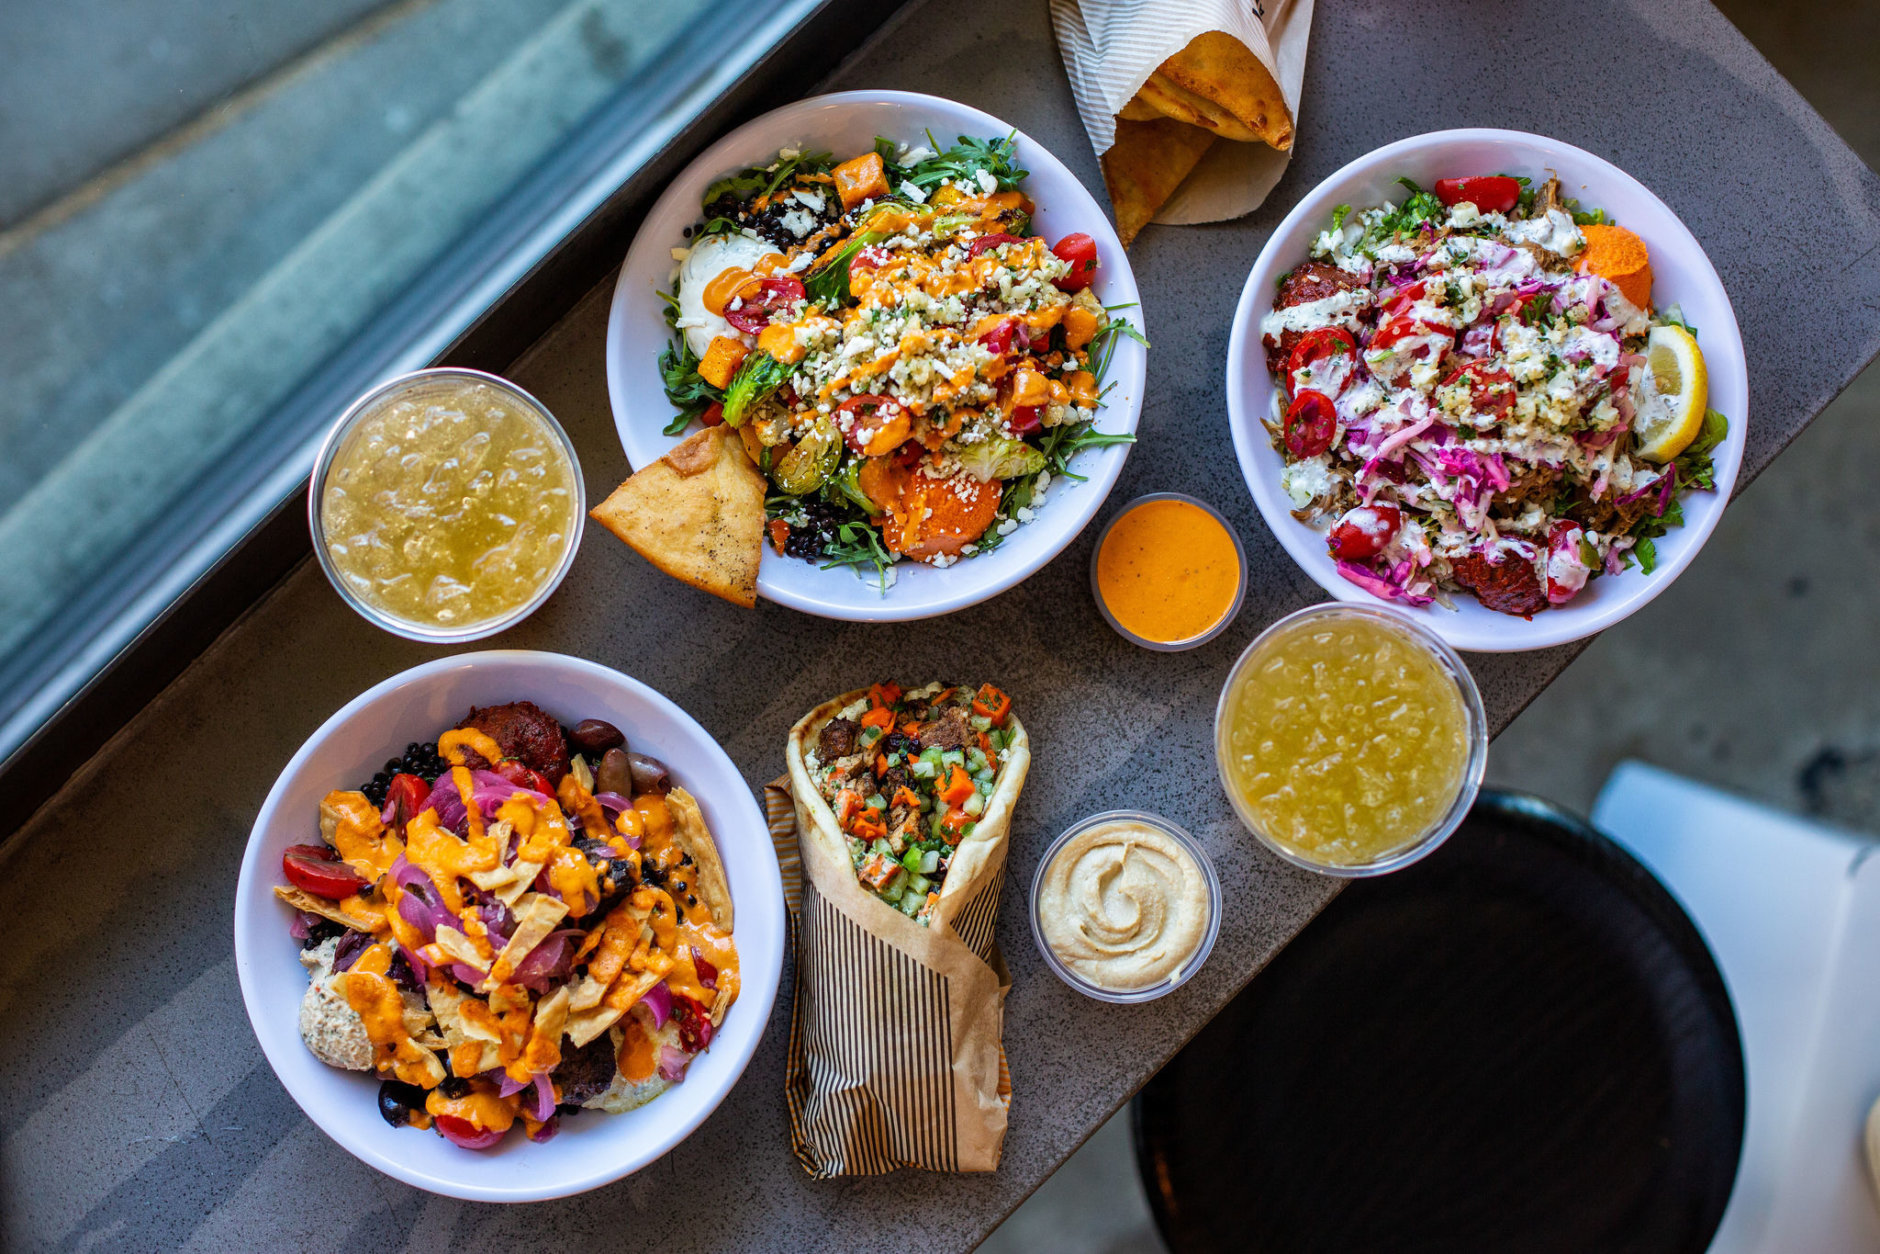 Bethesda-based Cava Group's expansion nationally was kicked into overdrive in August when it agreed to acquire Plano, Texas-based Mediterranean restaurant chain Zoe's Kitchen and its more than 260 restaurants for $300 million. (Courtesy Cava)